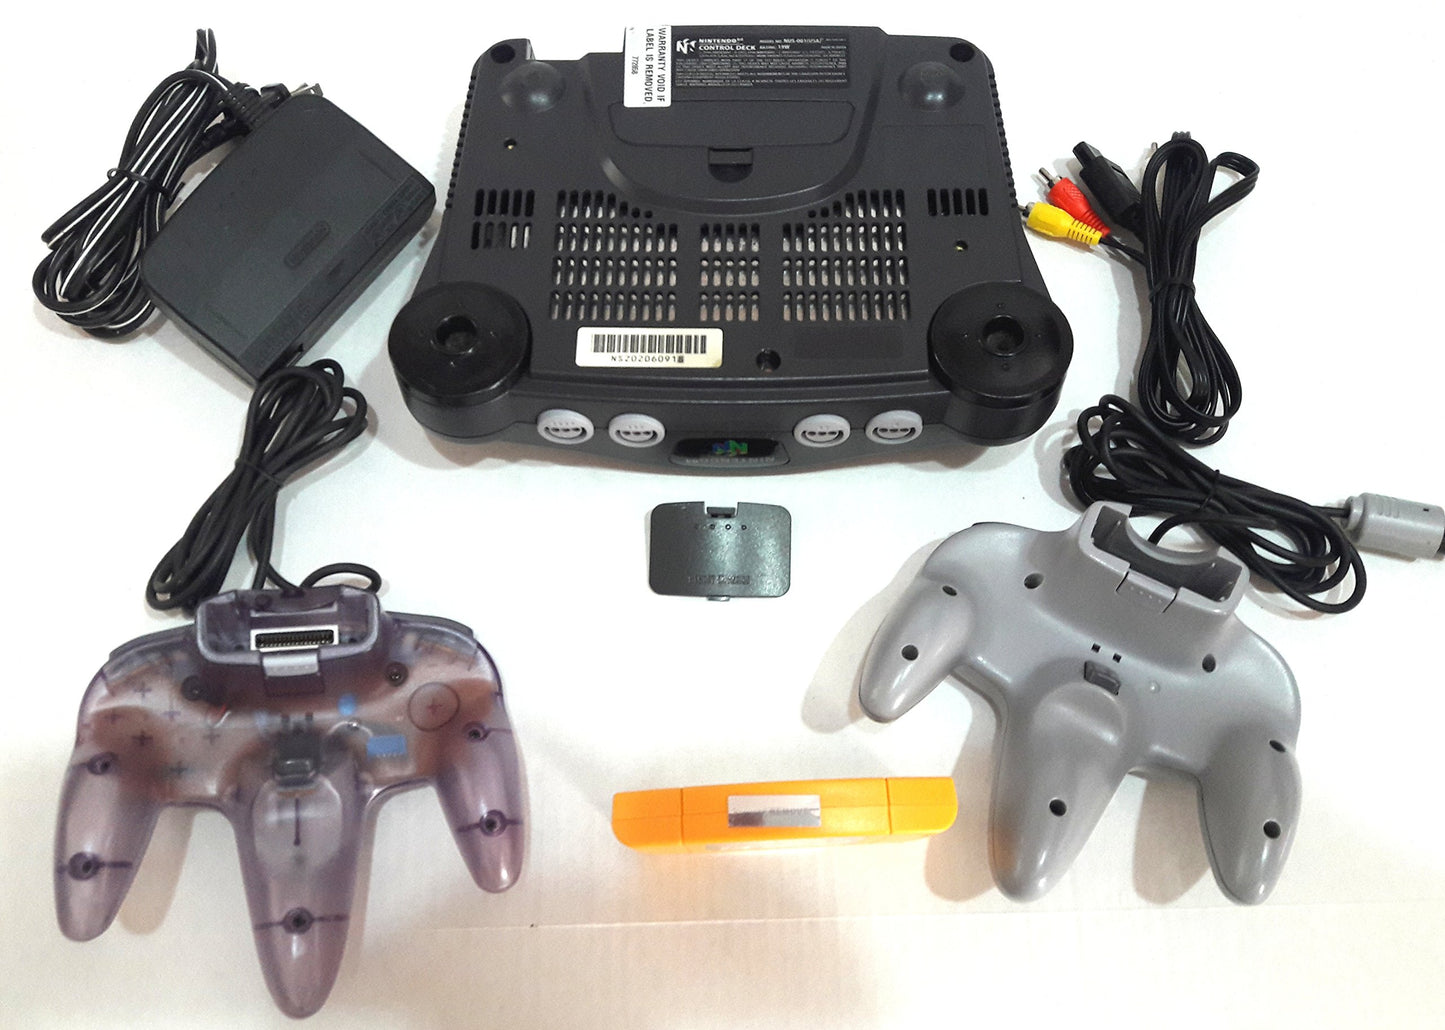 Nintendo 64 Console With Donkey Kong 64 Game & 2 Controllers